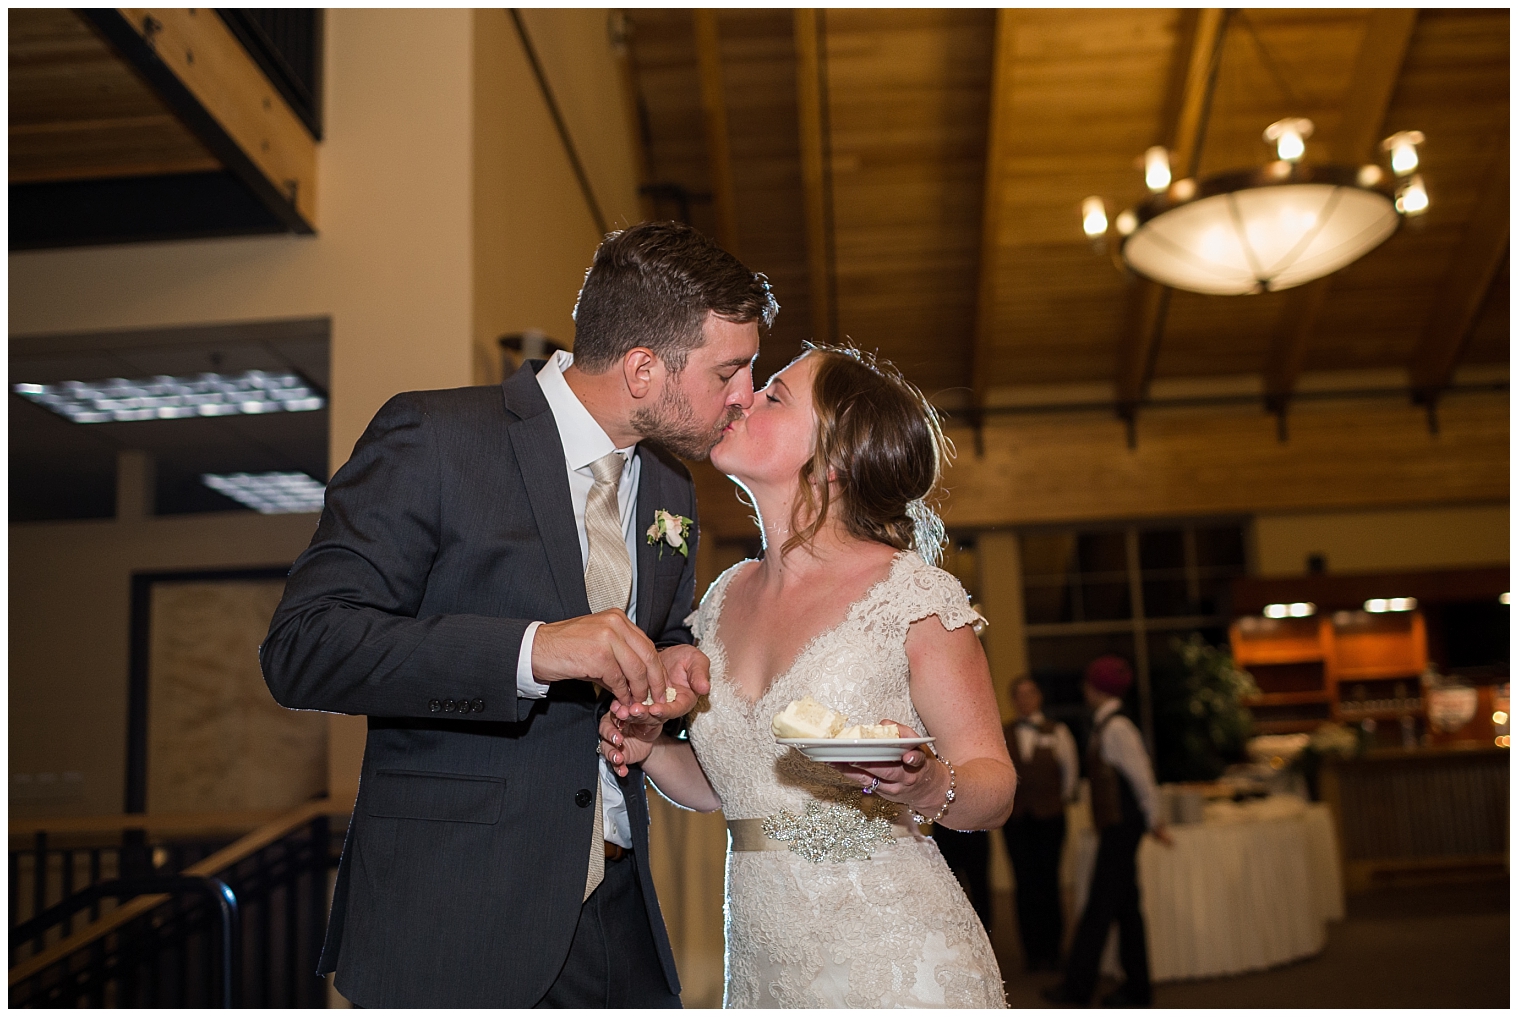 At their Copper Mountain wedding reception, the bride and groom kiss after cutting the cake.